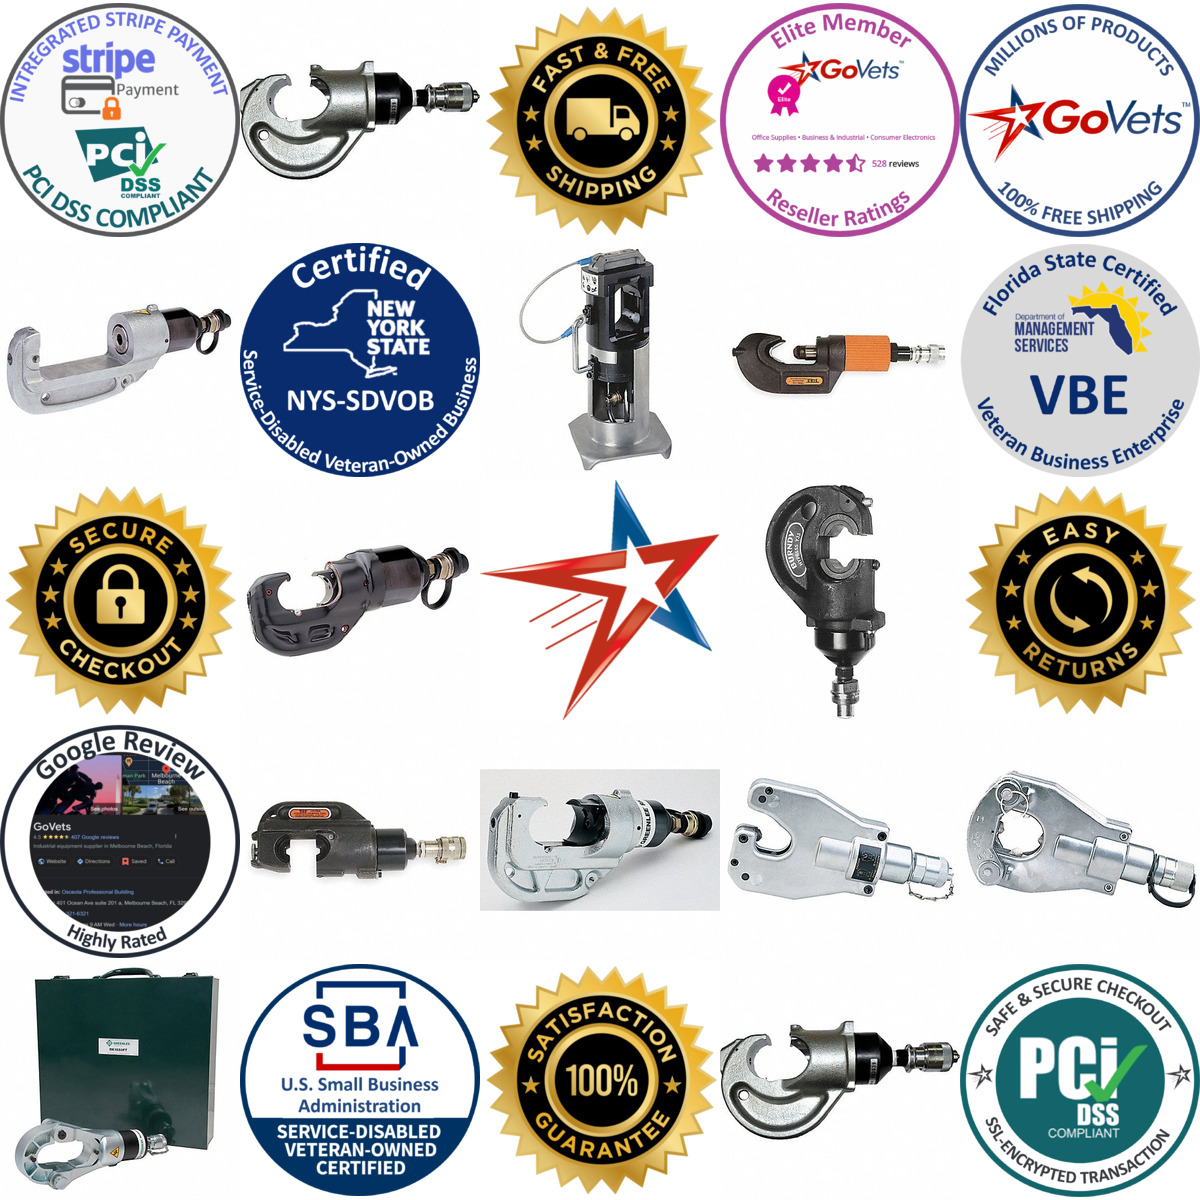 A selection of Remote Powered Crimping Heads products on GoVets